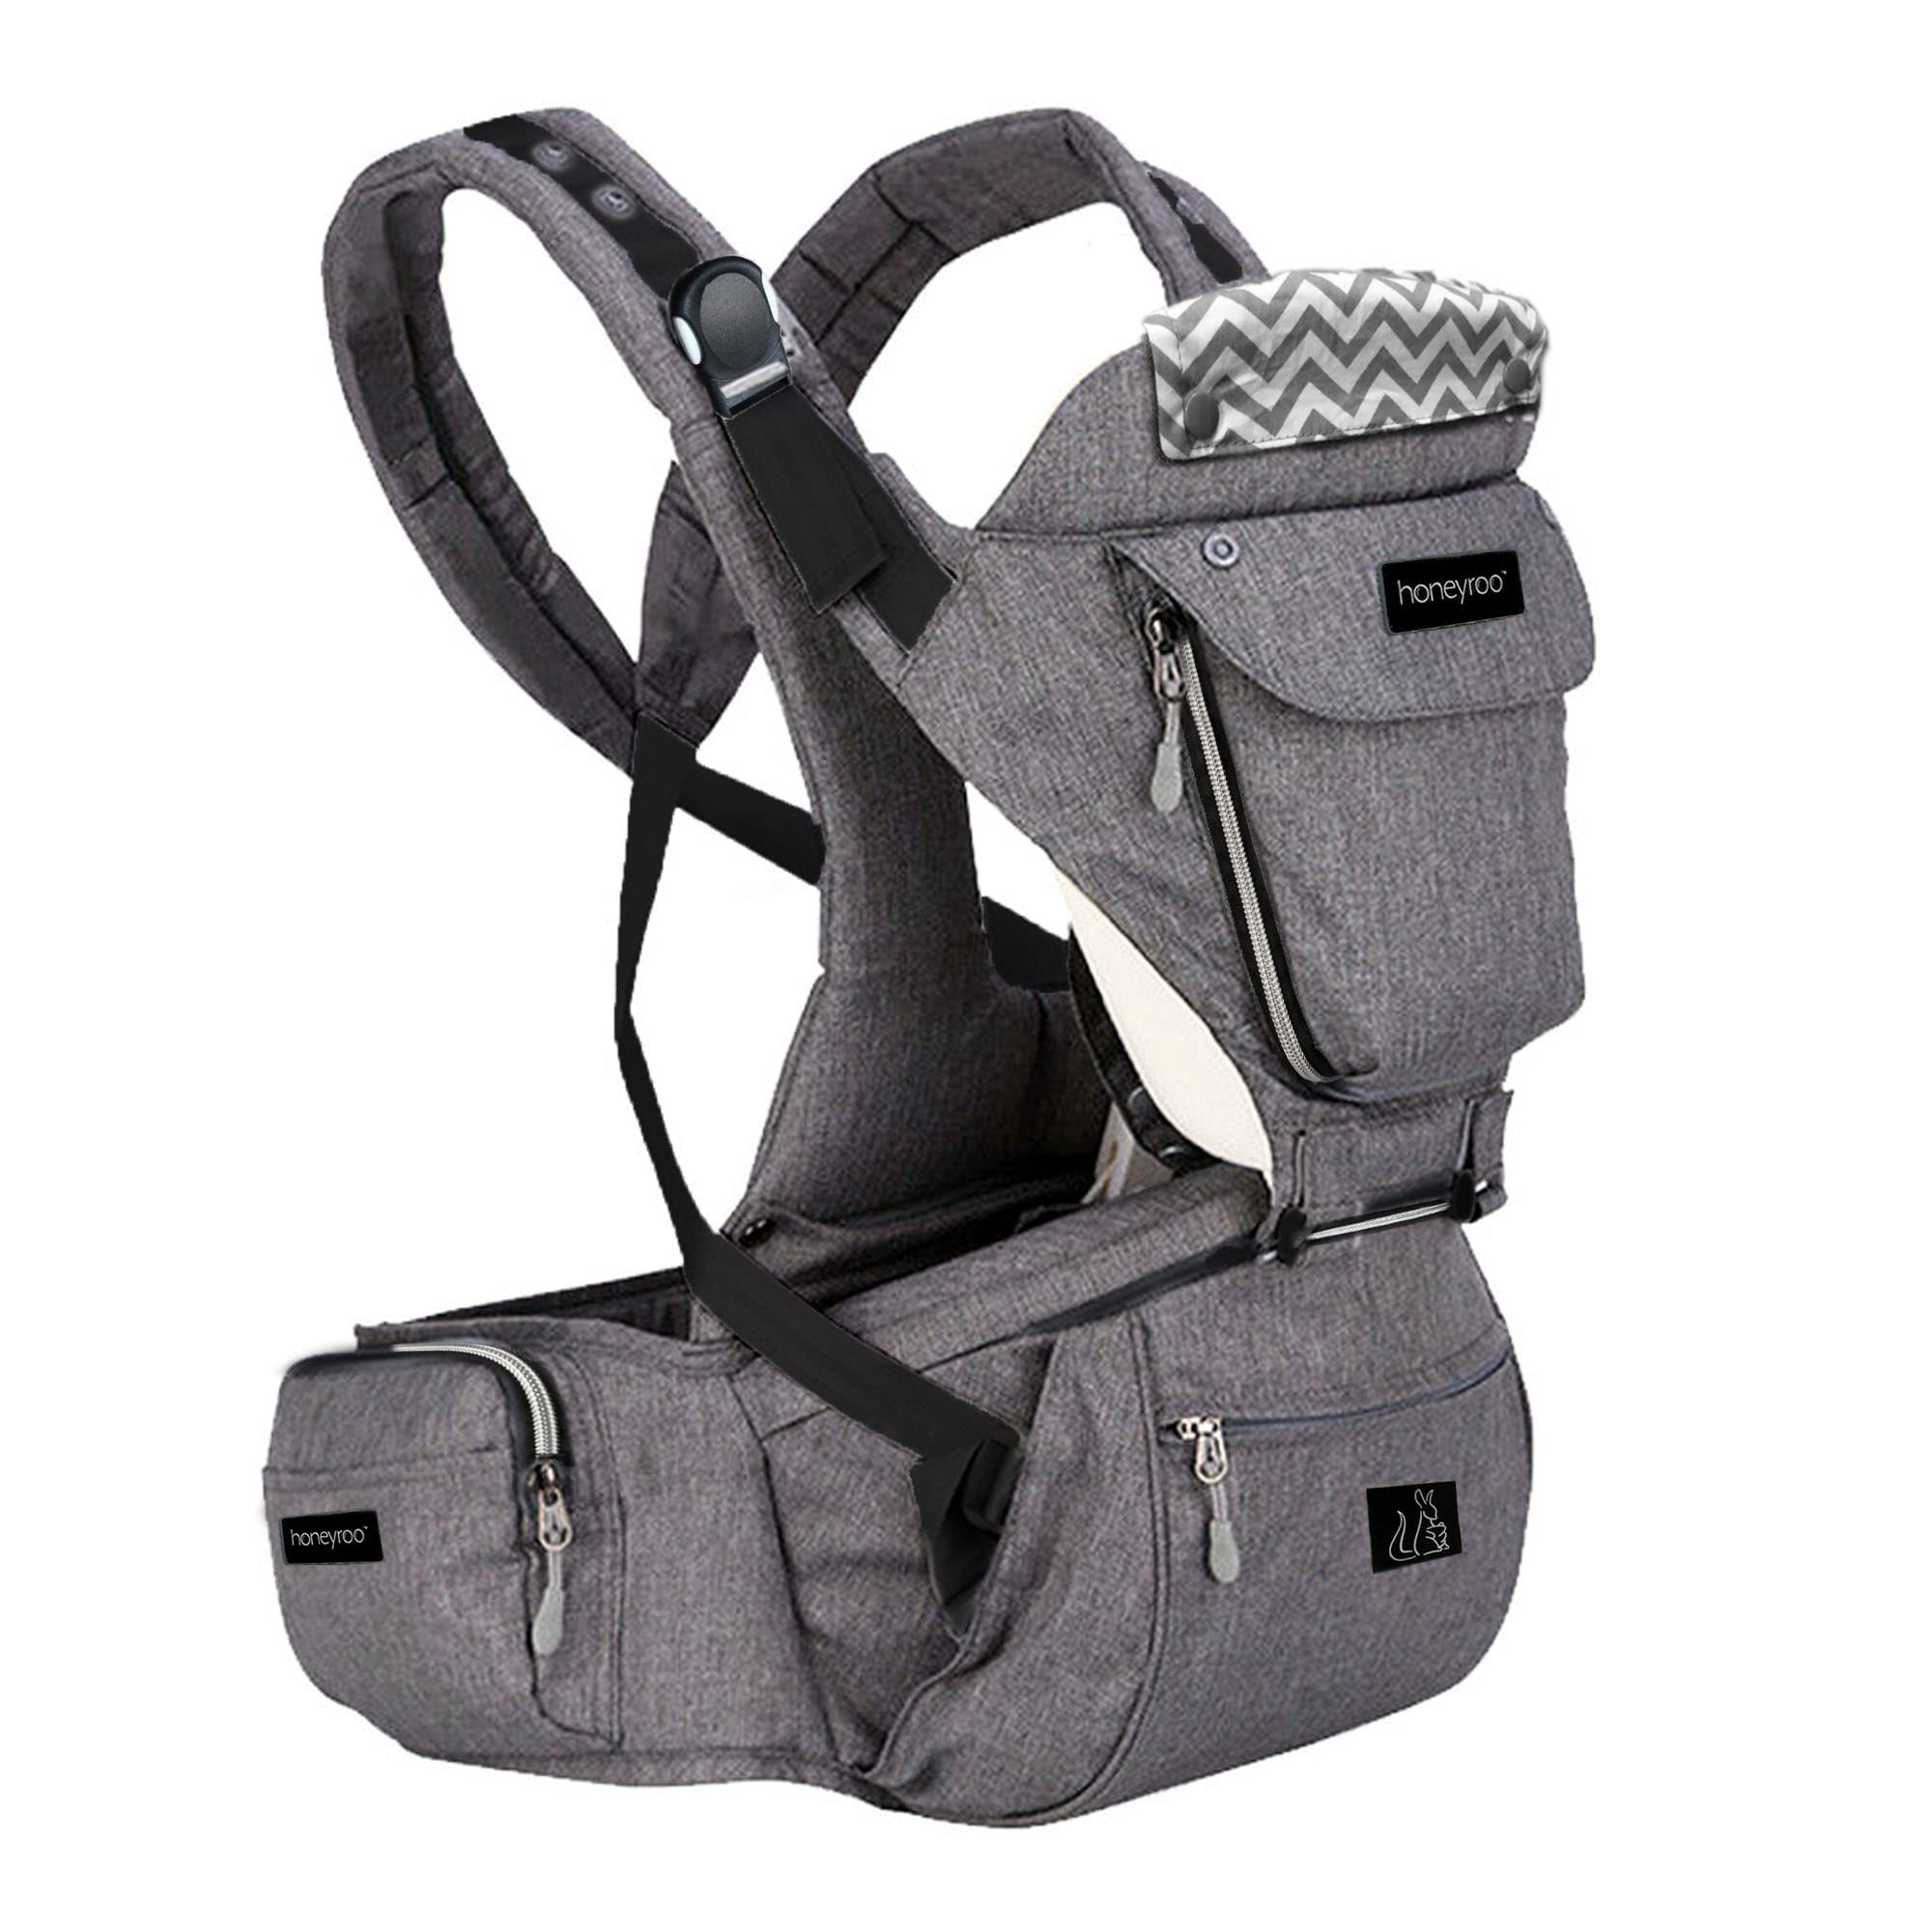 honeyroo Baby Carrier, Joey Classic, Ergonomic 3D Hip Seat, New Magnetic Self Buckling Clips, Light Weight and Breathable - 6 in 1 Position Design, 3-36 Months, Front and Back Carry, Platinum Gray